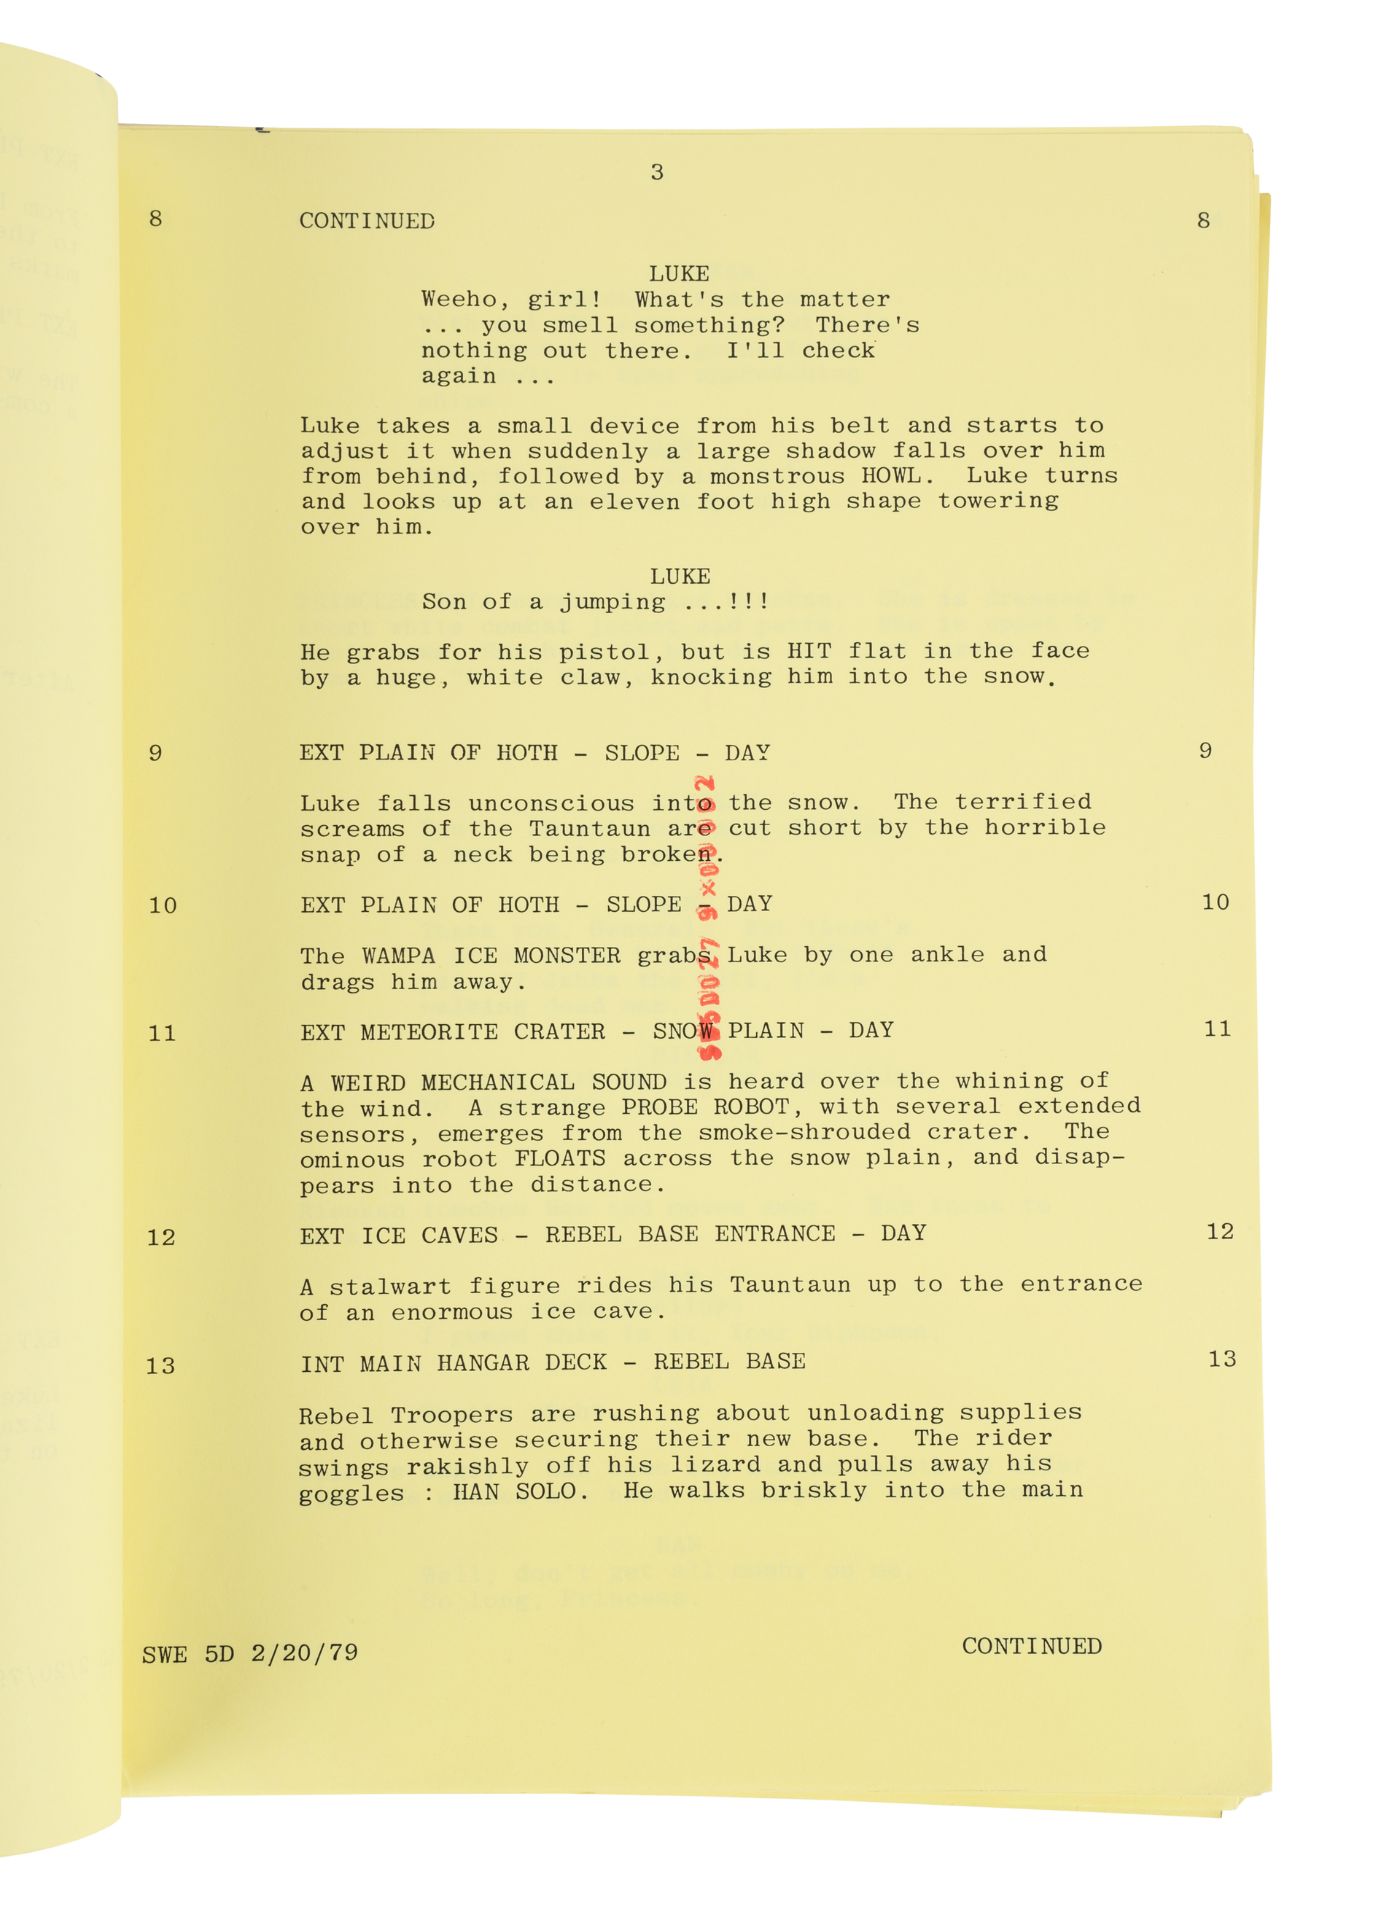 STAR WARS: THE EMPIRE STRIKES BACK (1980) - Anthony Daniels Collection: Hand-annotated Partial Scrip - Image 3 of 12